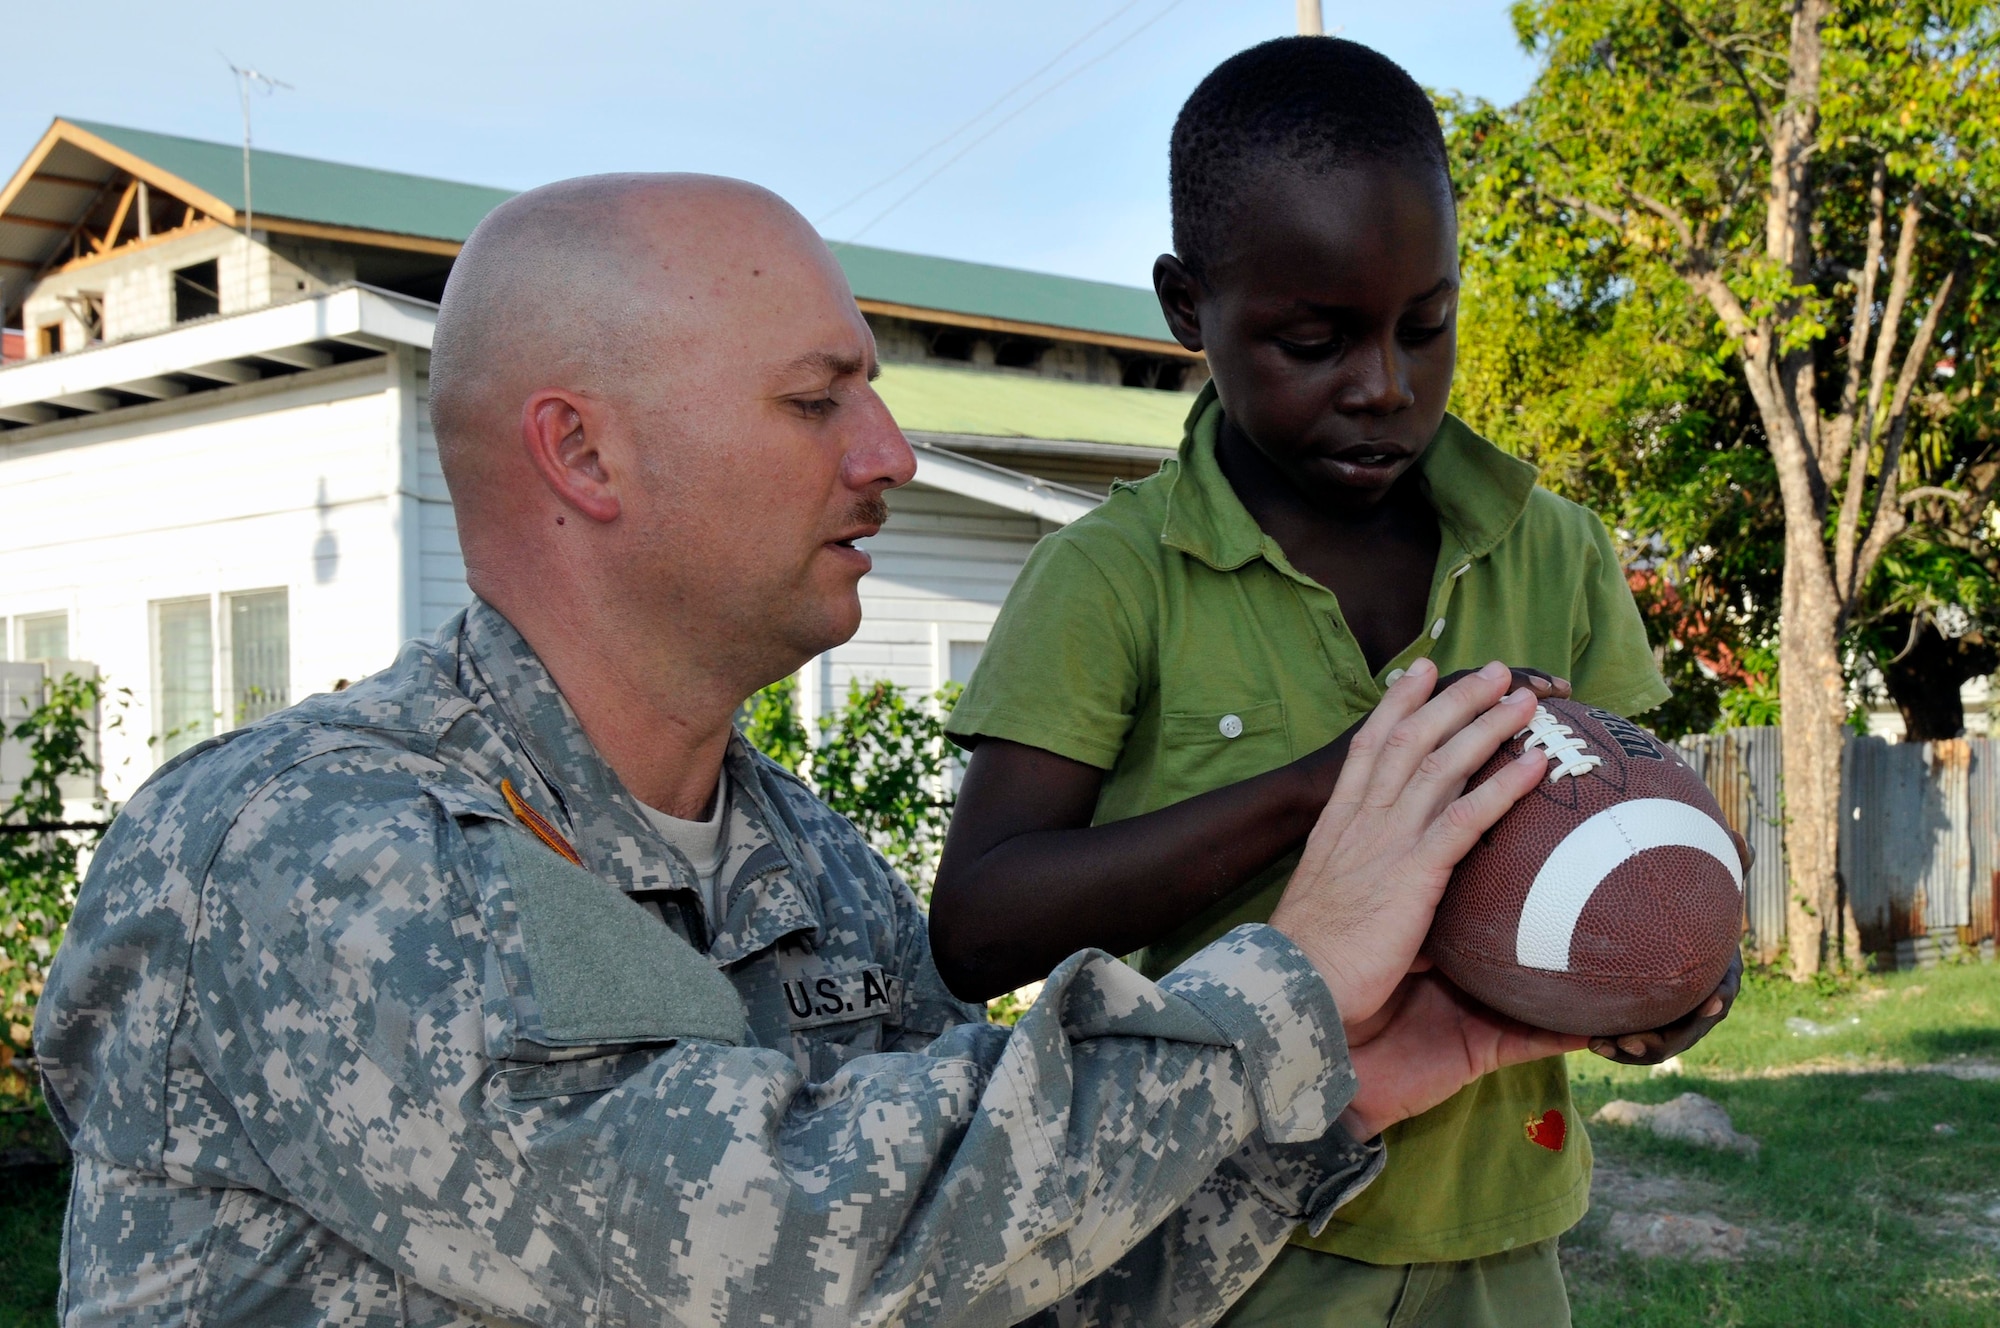 Command Sgt. Maj. Lynward Hall, with the 878th Engineer Battalion, Georgia Army National Guard, shows a Guyanese boy how to throw a football at the Joshua's Place Orphanage Sept. 9, 2009. Hall's battalion brought 32 duffel bags of toys and clothes and over $3,800 in donated items to the orphanage. (U.S. Air Force photo by Airman 1st Class Perry Aston) (Released)